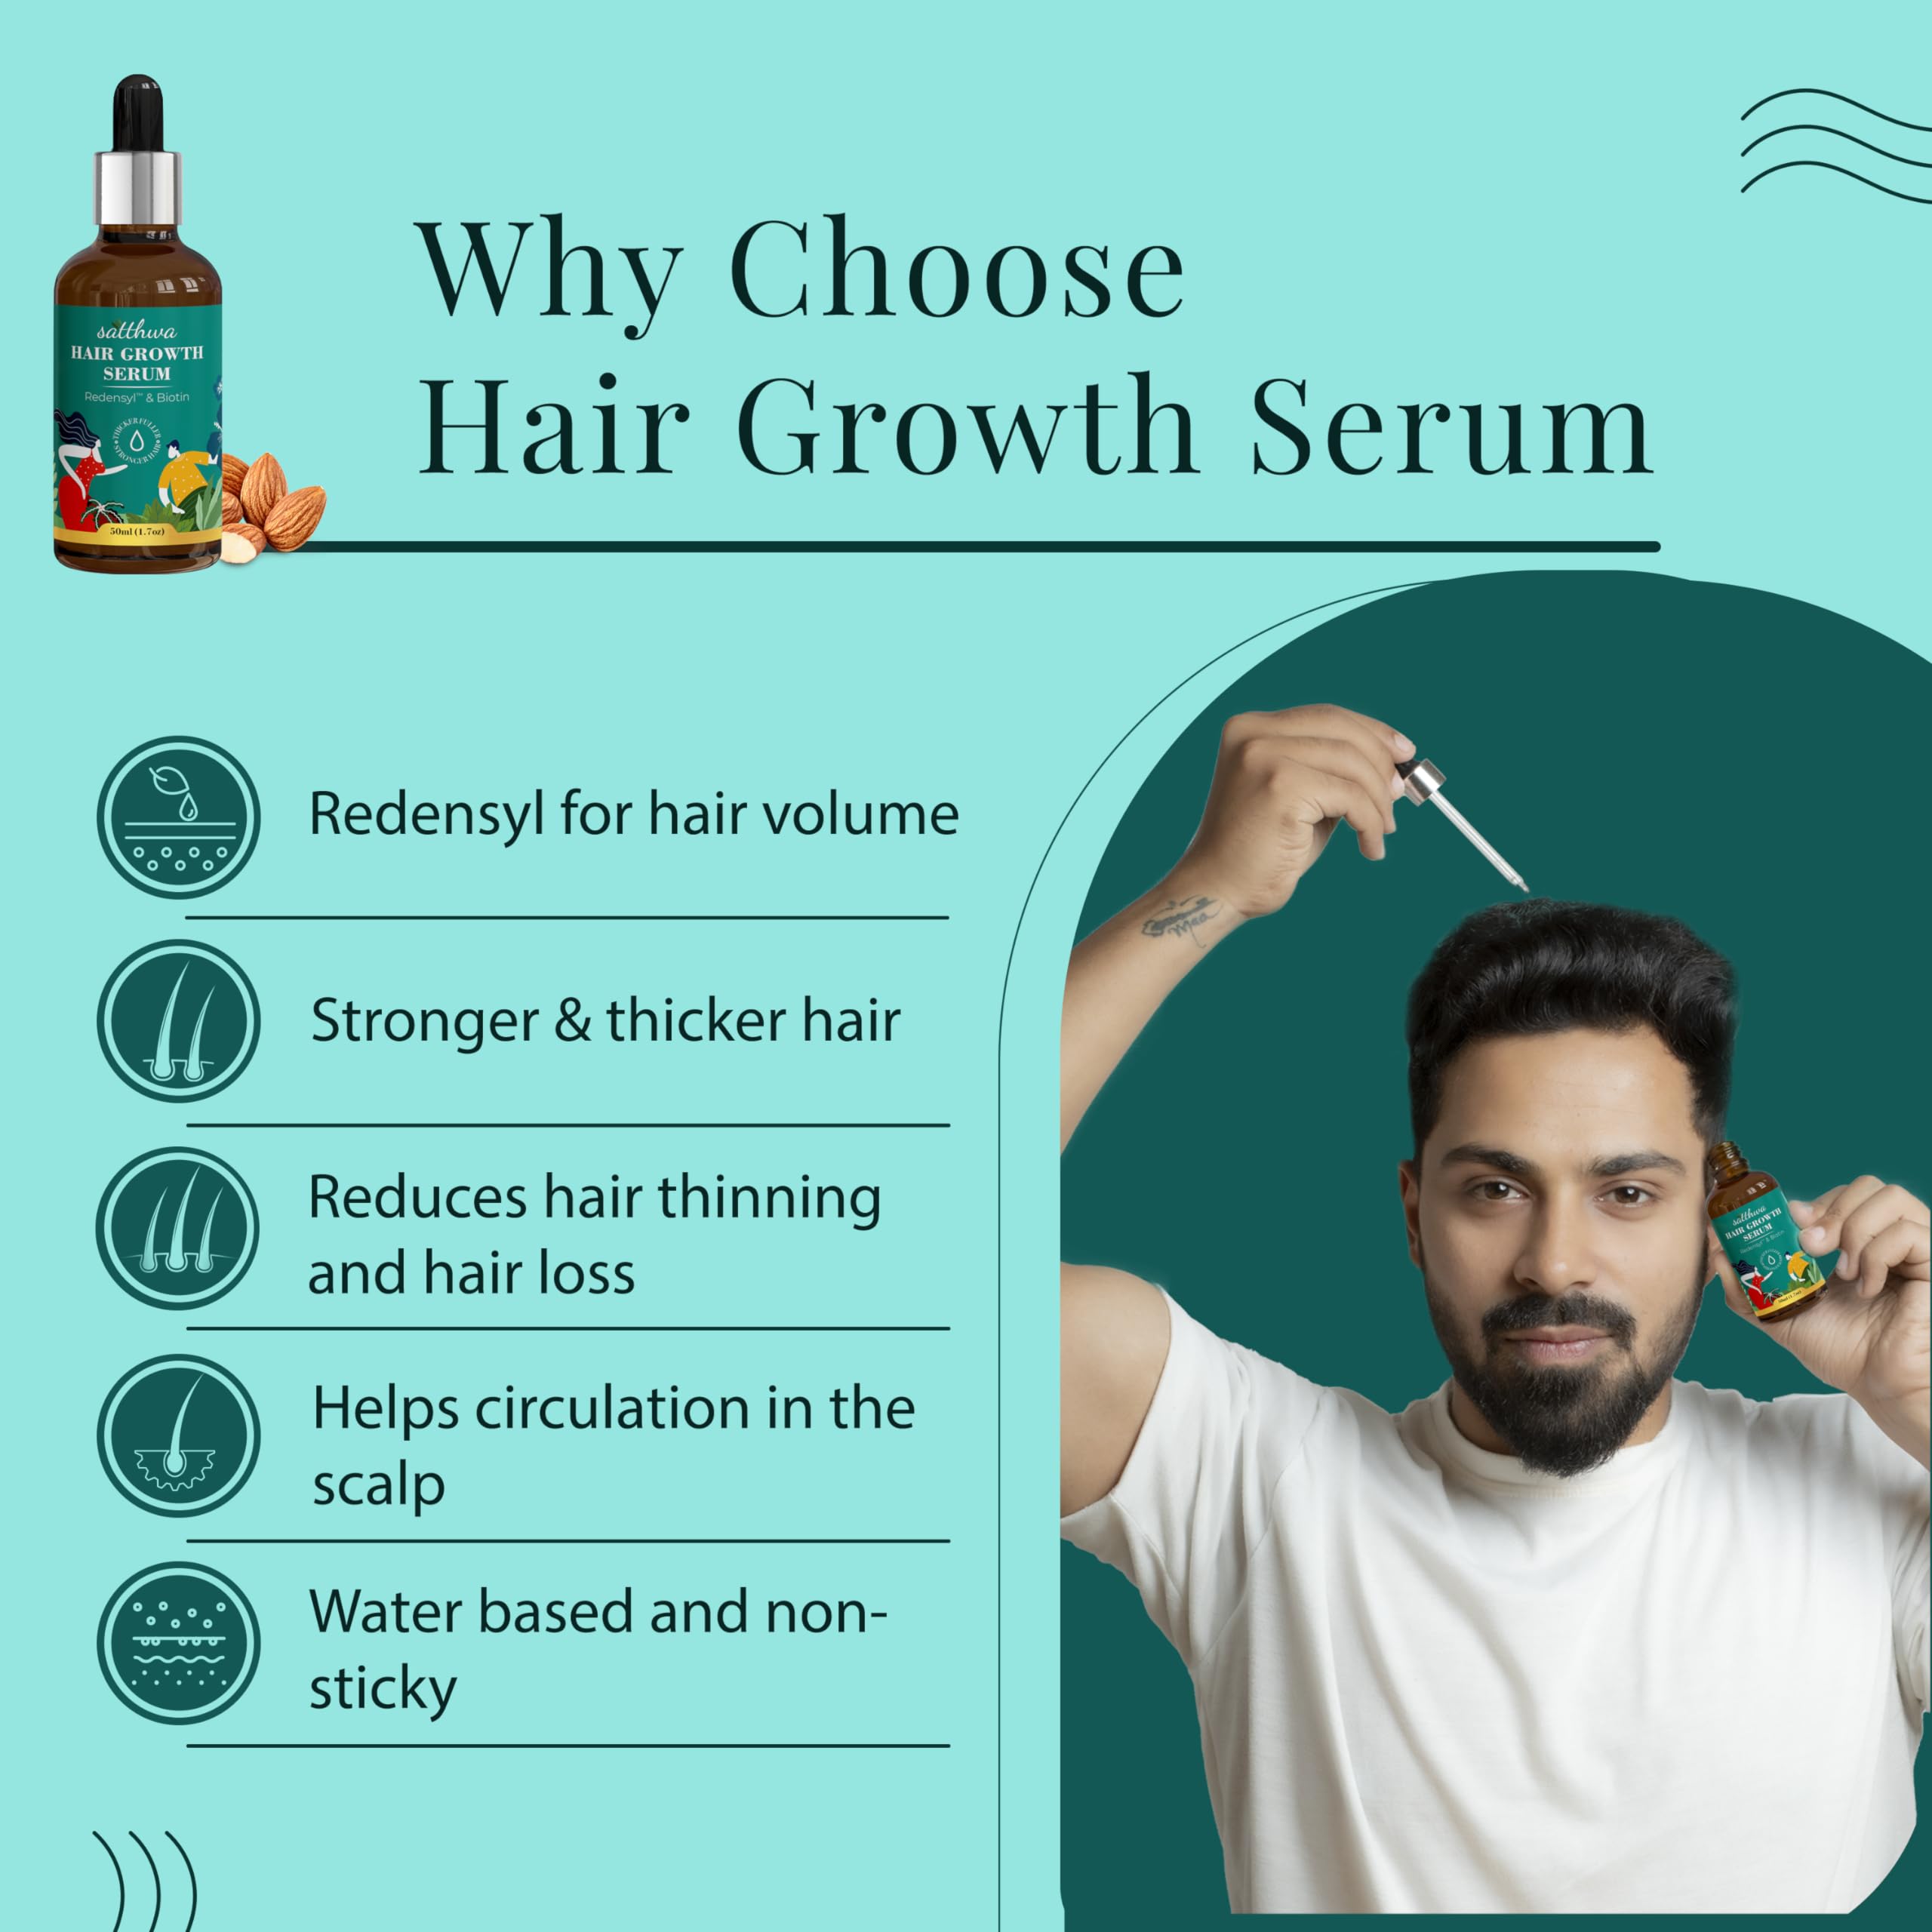 Satthwa Hair Growth Serum with Redensyl 3% & Anagain 4% - Thicker & Fuller For Hair Fall Control For Men & Women, 50ml (1.7oz)